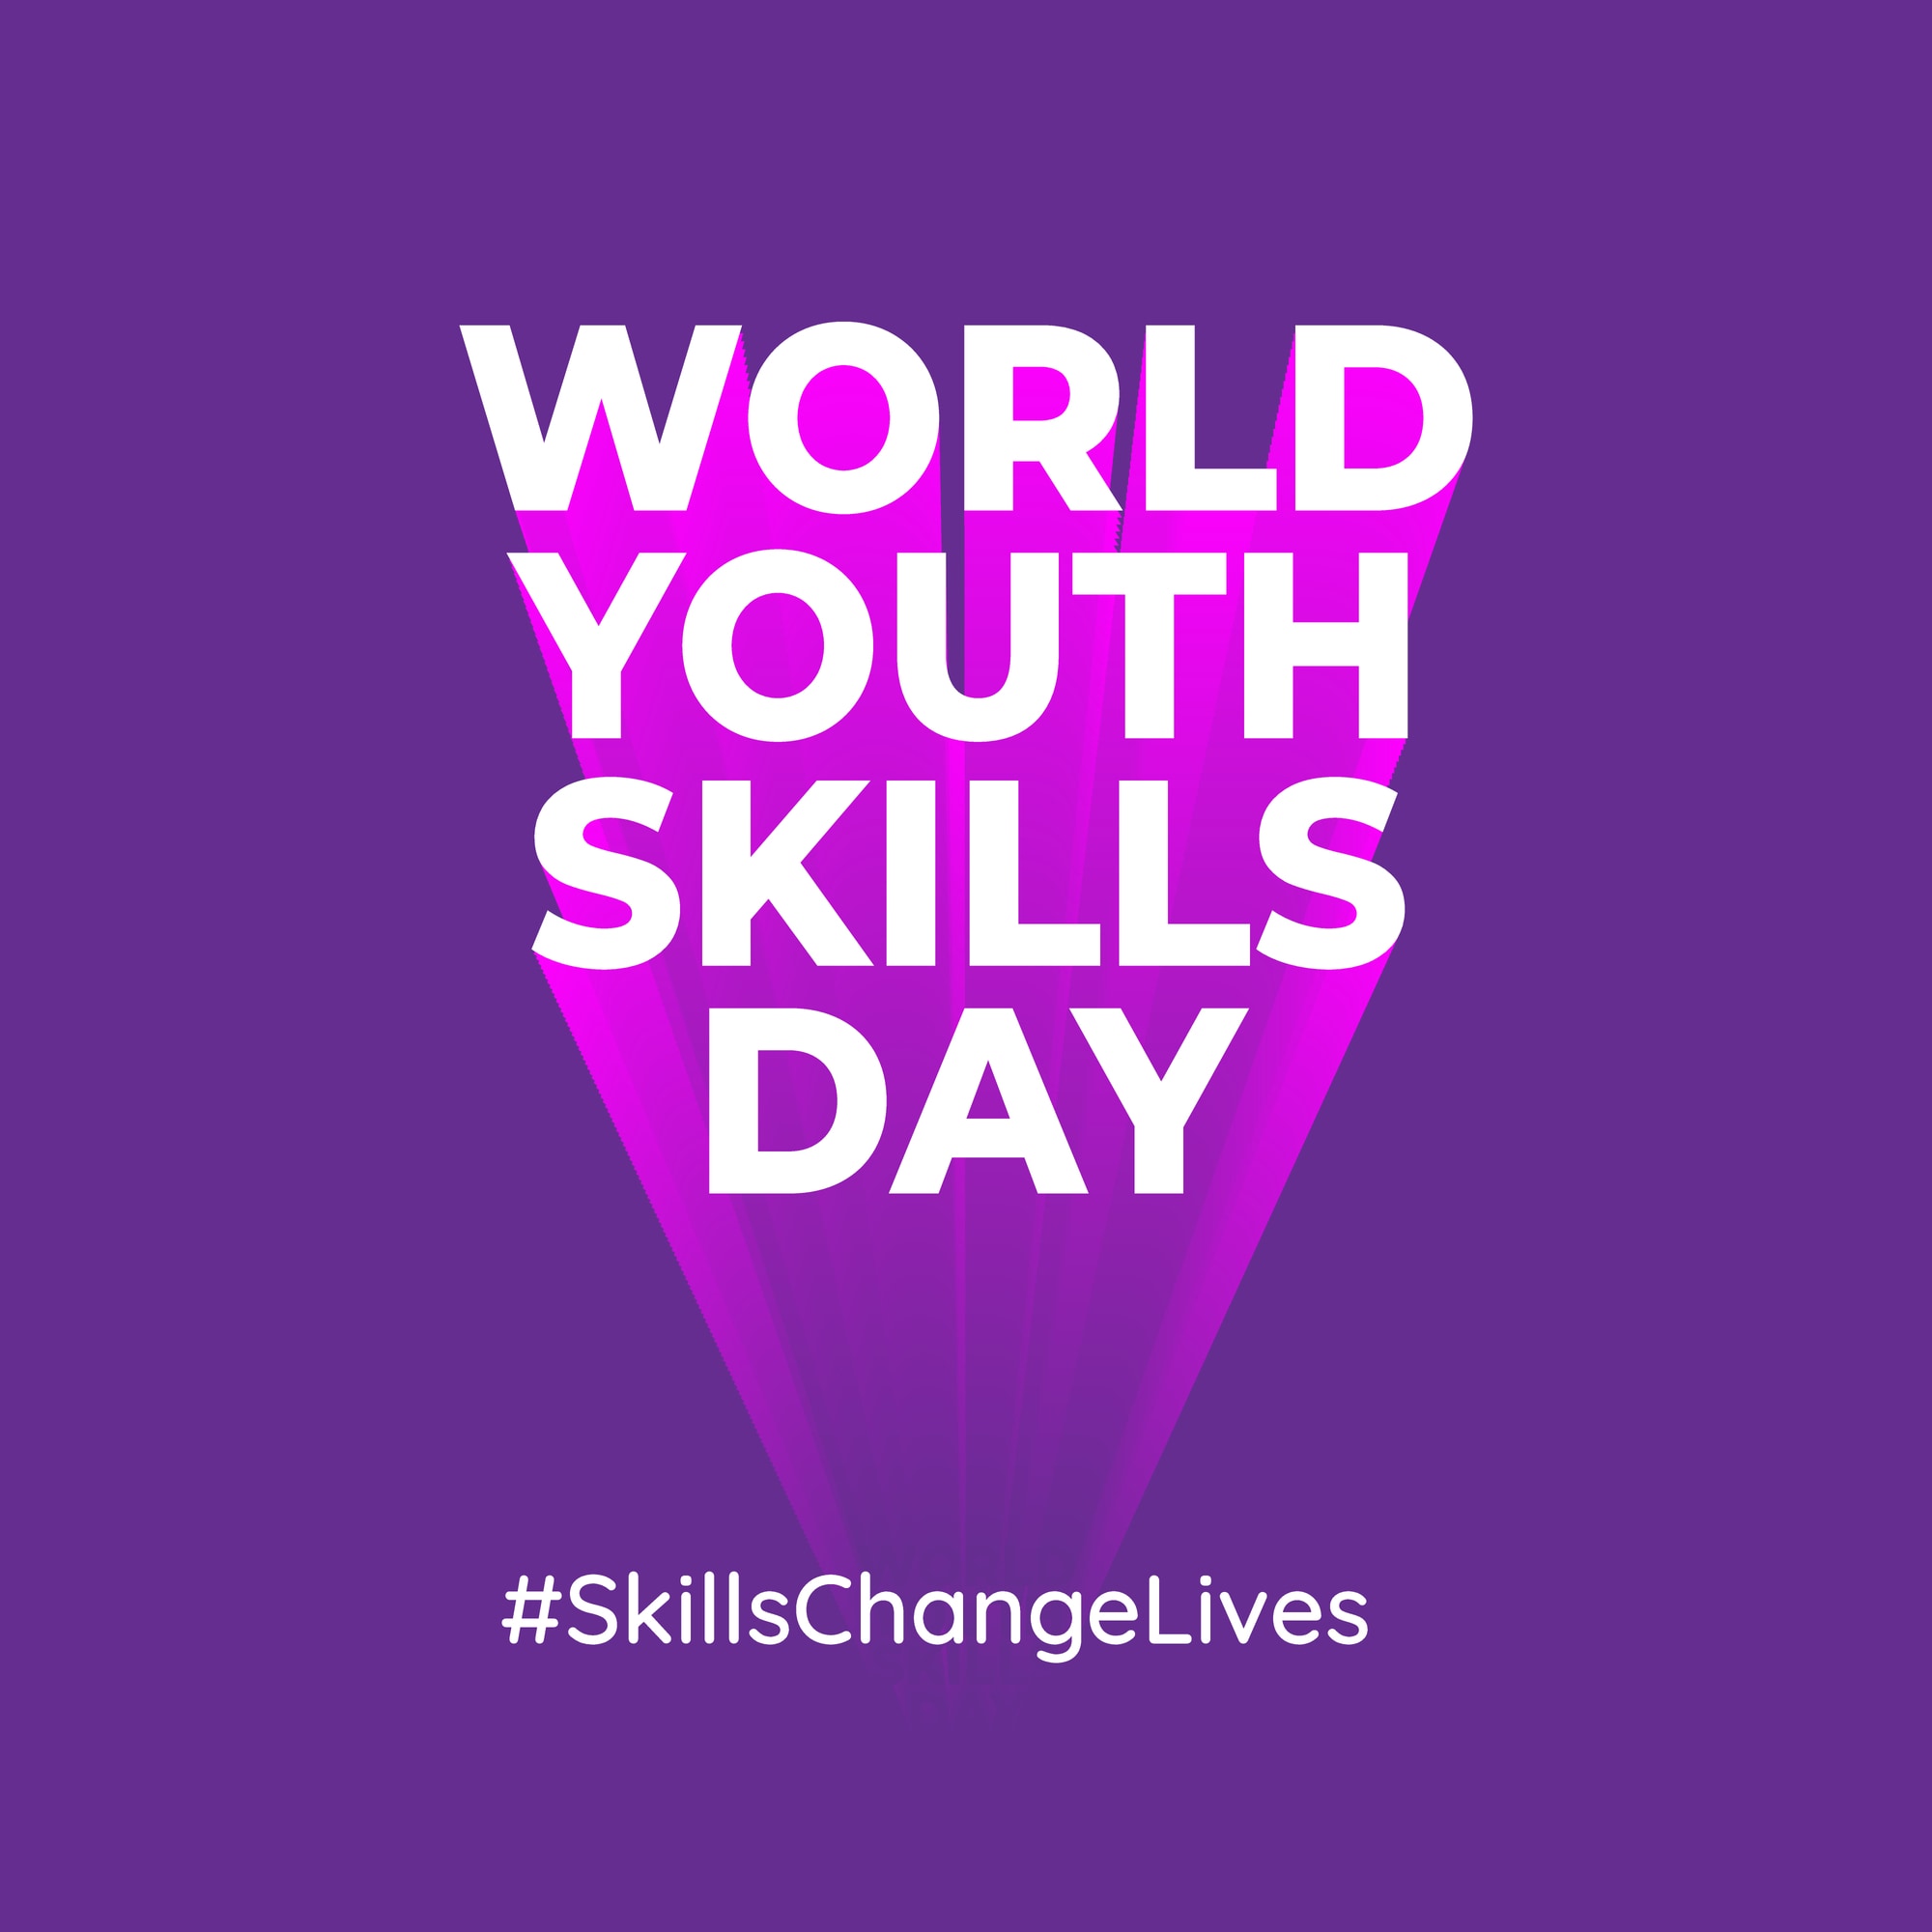 Happy World Youth Skills Day 2022: Images, Wishes, Quotes, Messages and WhatsApp Greetings to share.  (Image: Shutterstock)